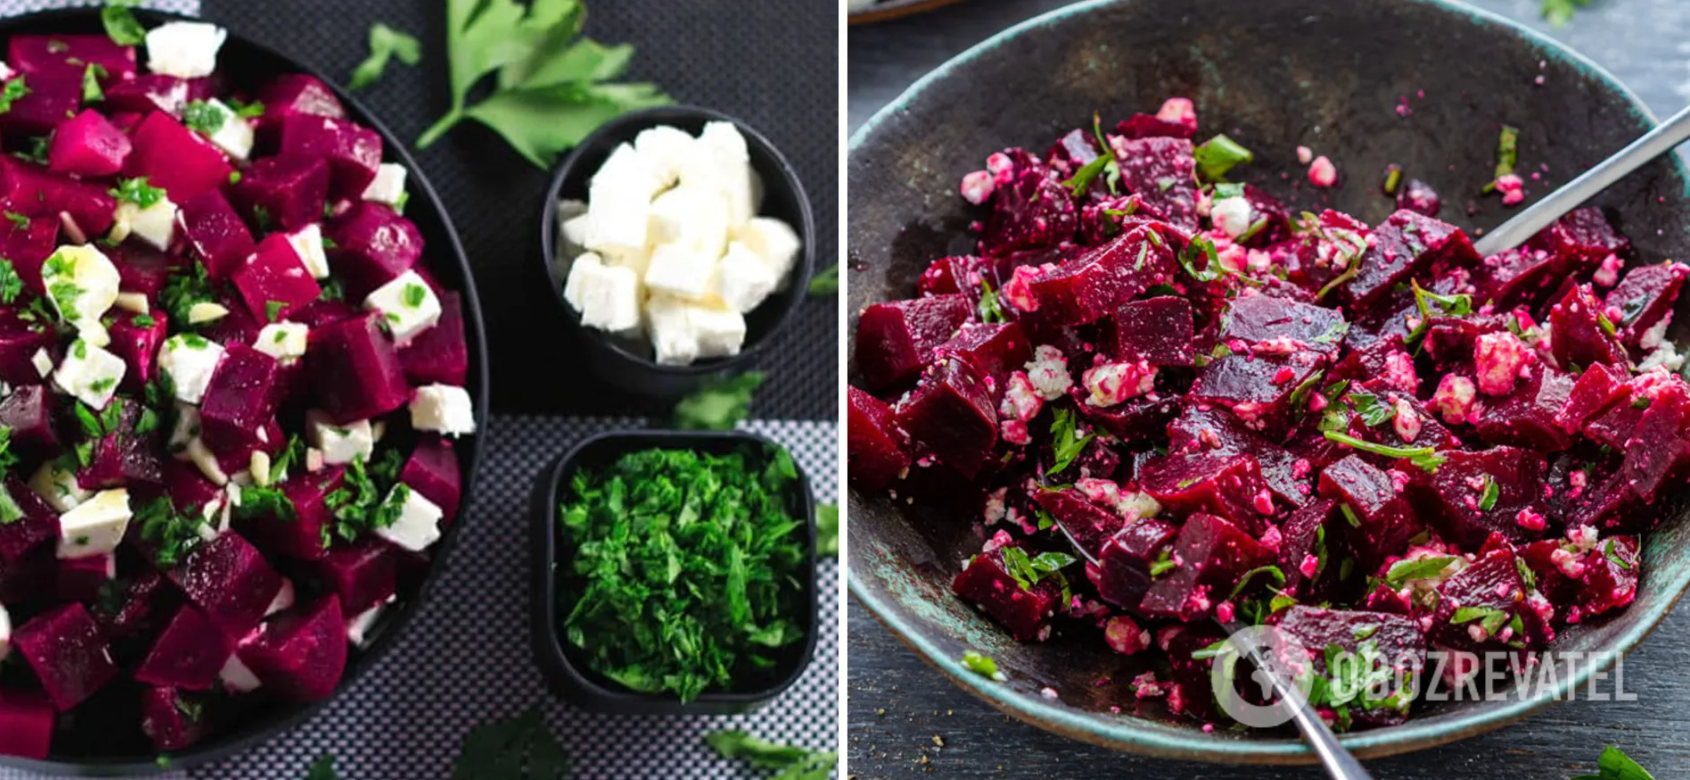 How to make a delicious beetroot salad